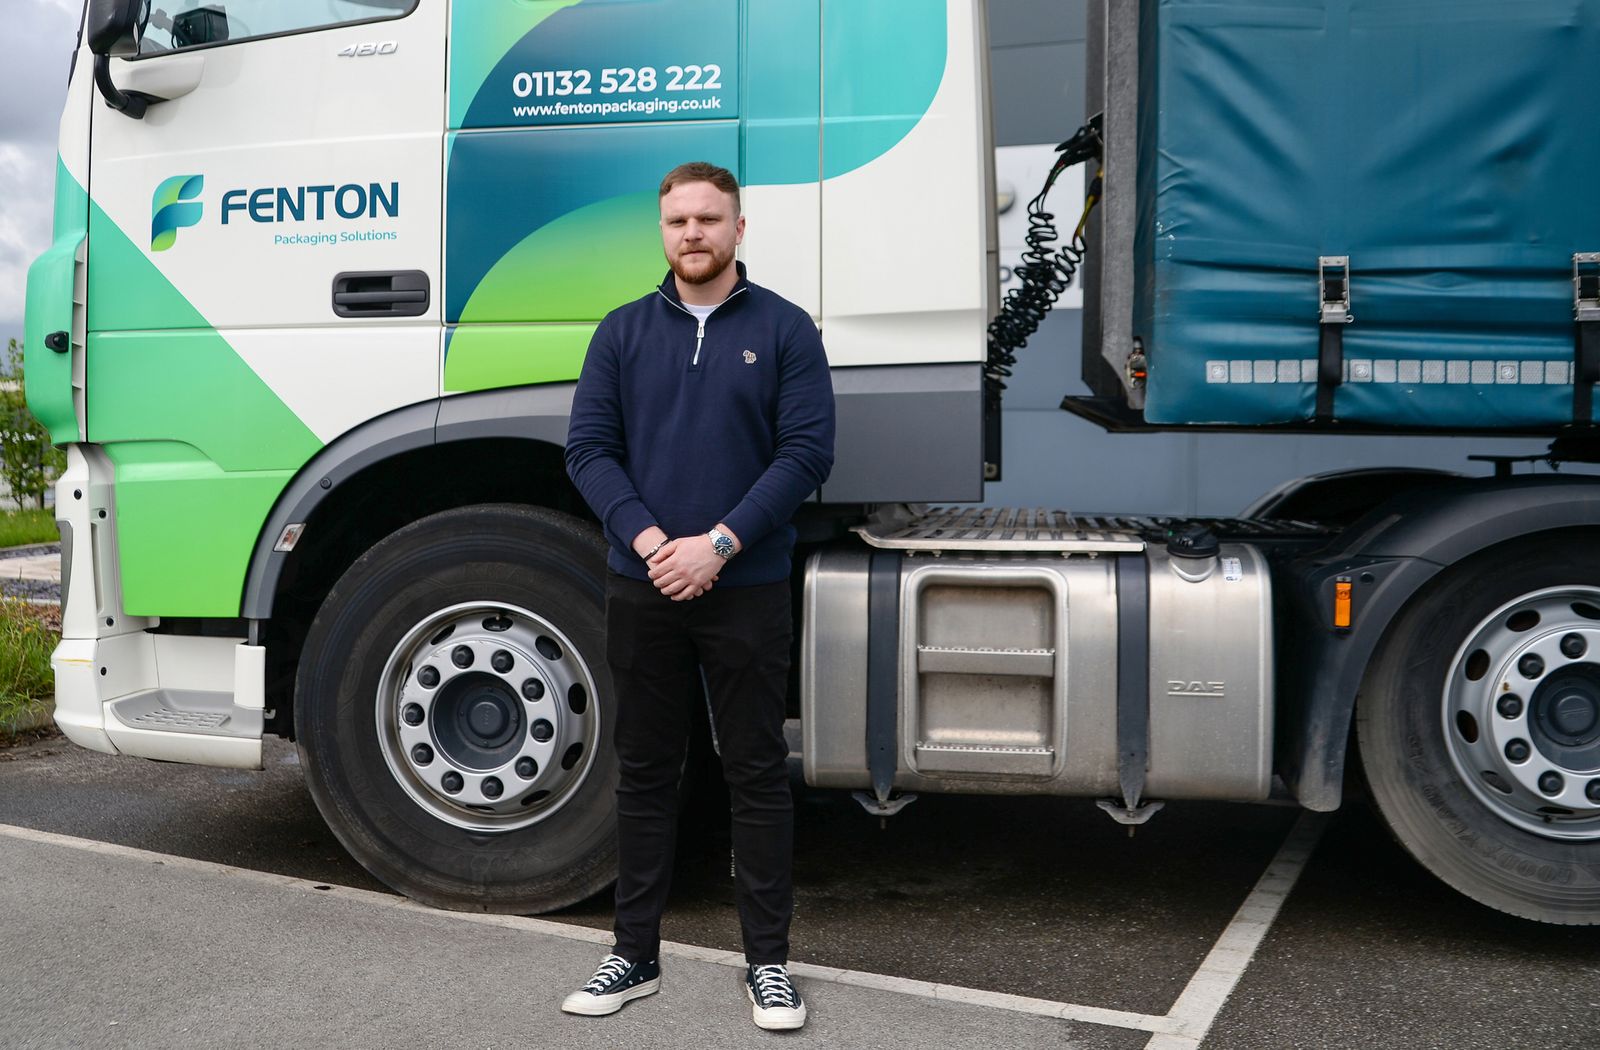 Fenton Packaging Solutions invests in the future